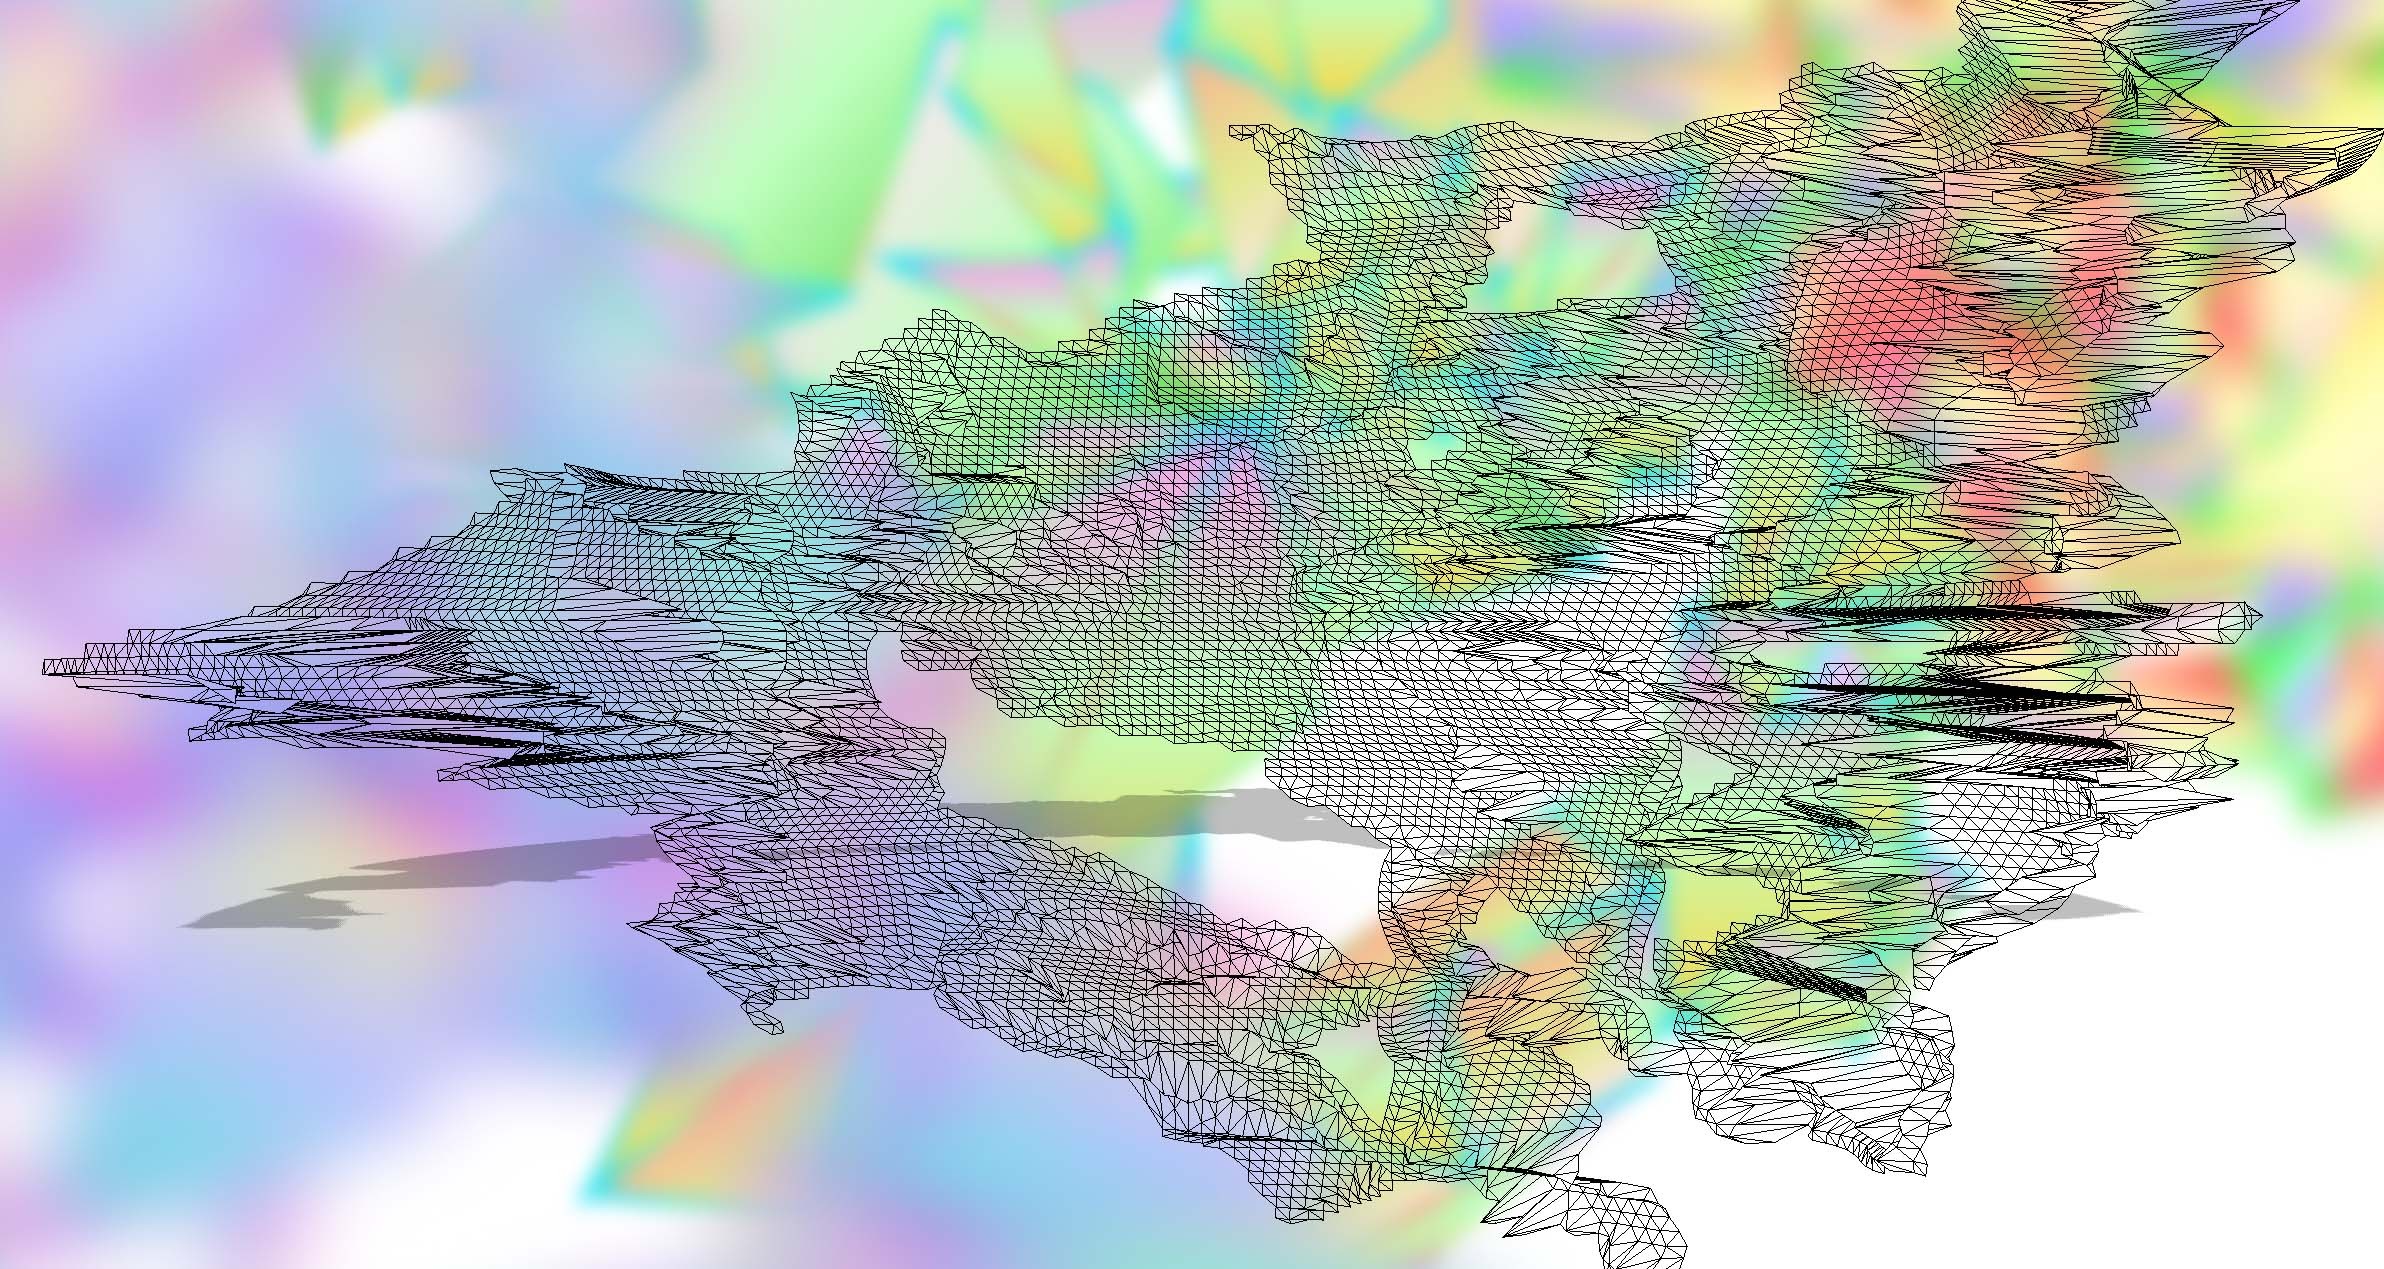 Abstract Wireframe Digital Art 2384x1269